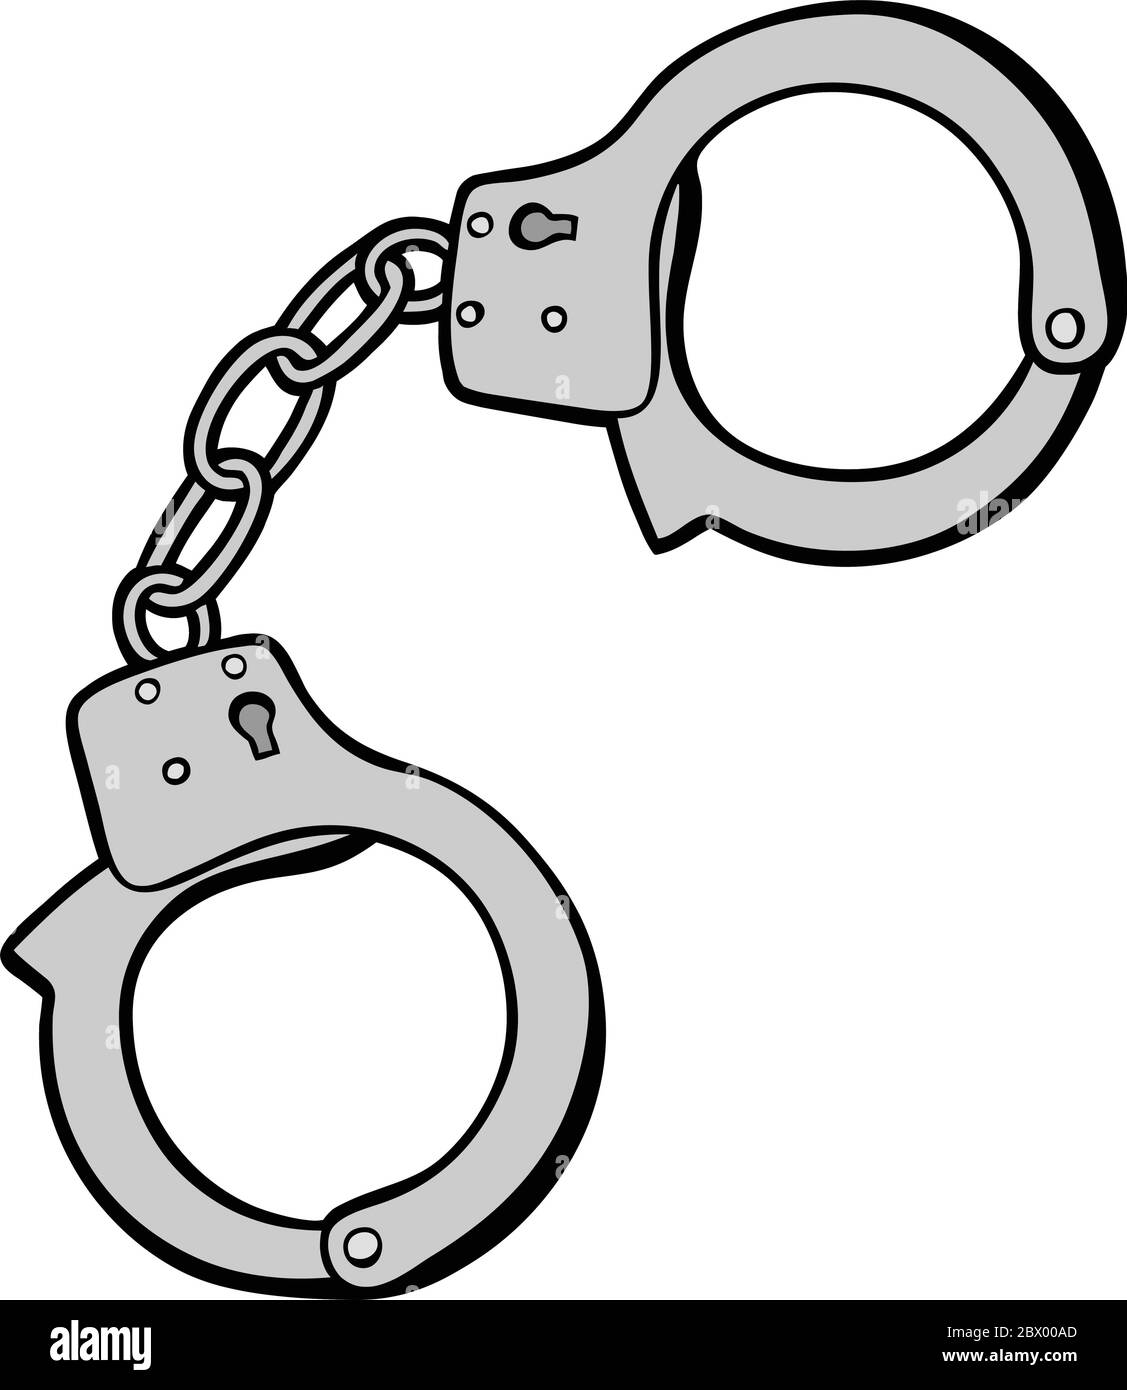 Handcuffs- An Illustration of a Pair of Handcuffs. Stock Vector